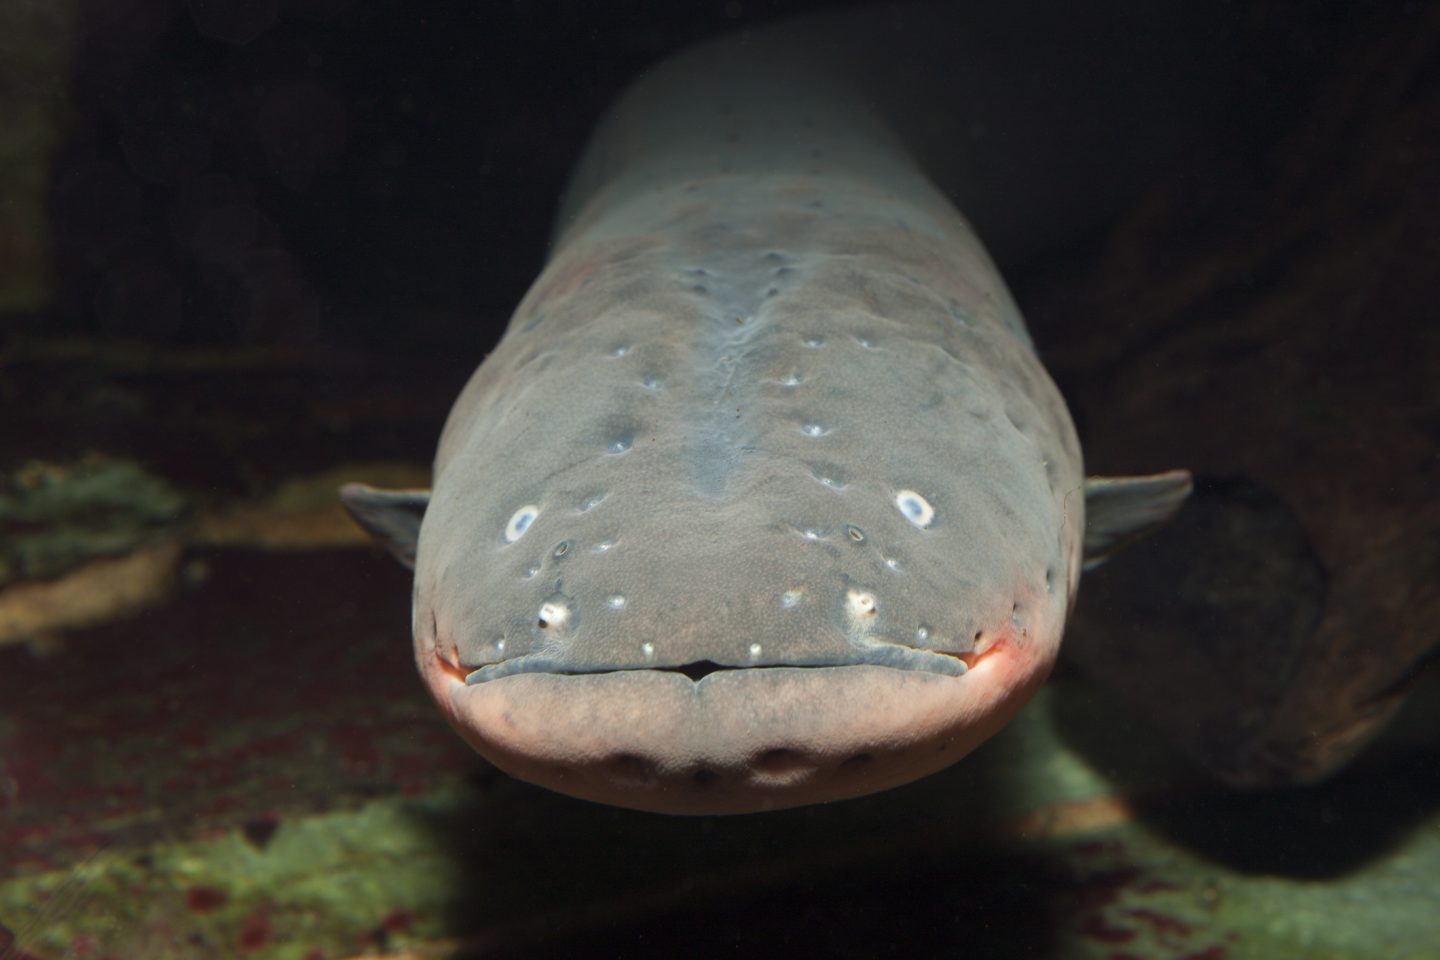 An electric eel: could this be the new face of soft robotics?